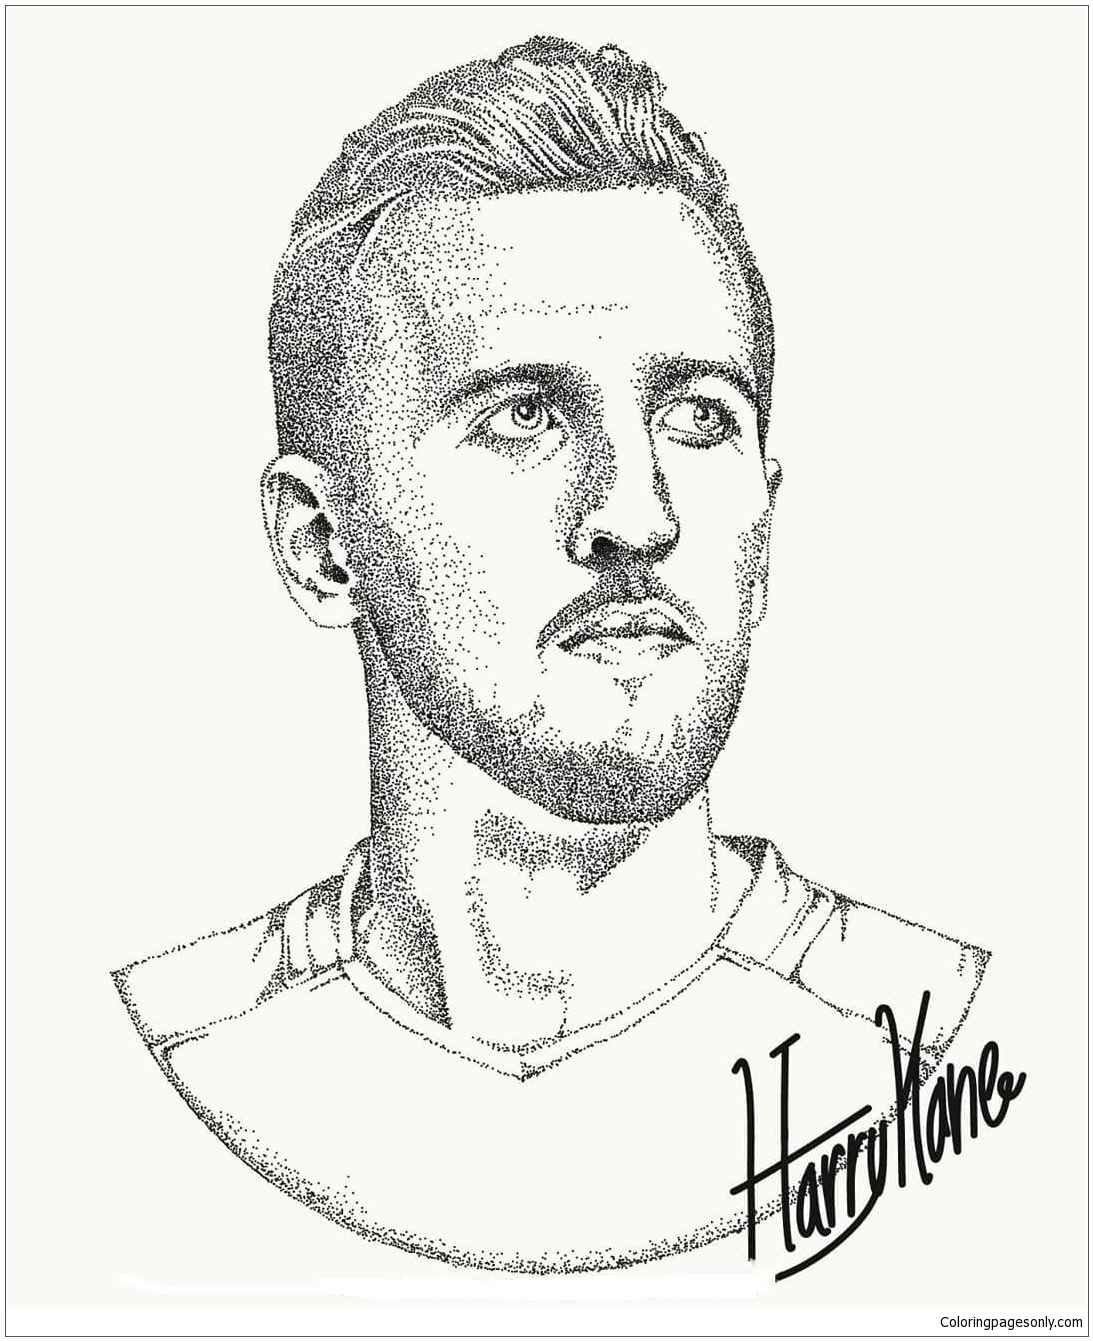 Harry Kane-image 9 Coloring Pages